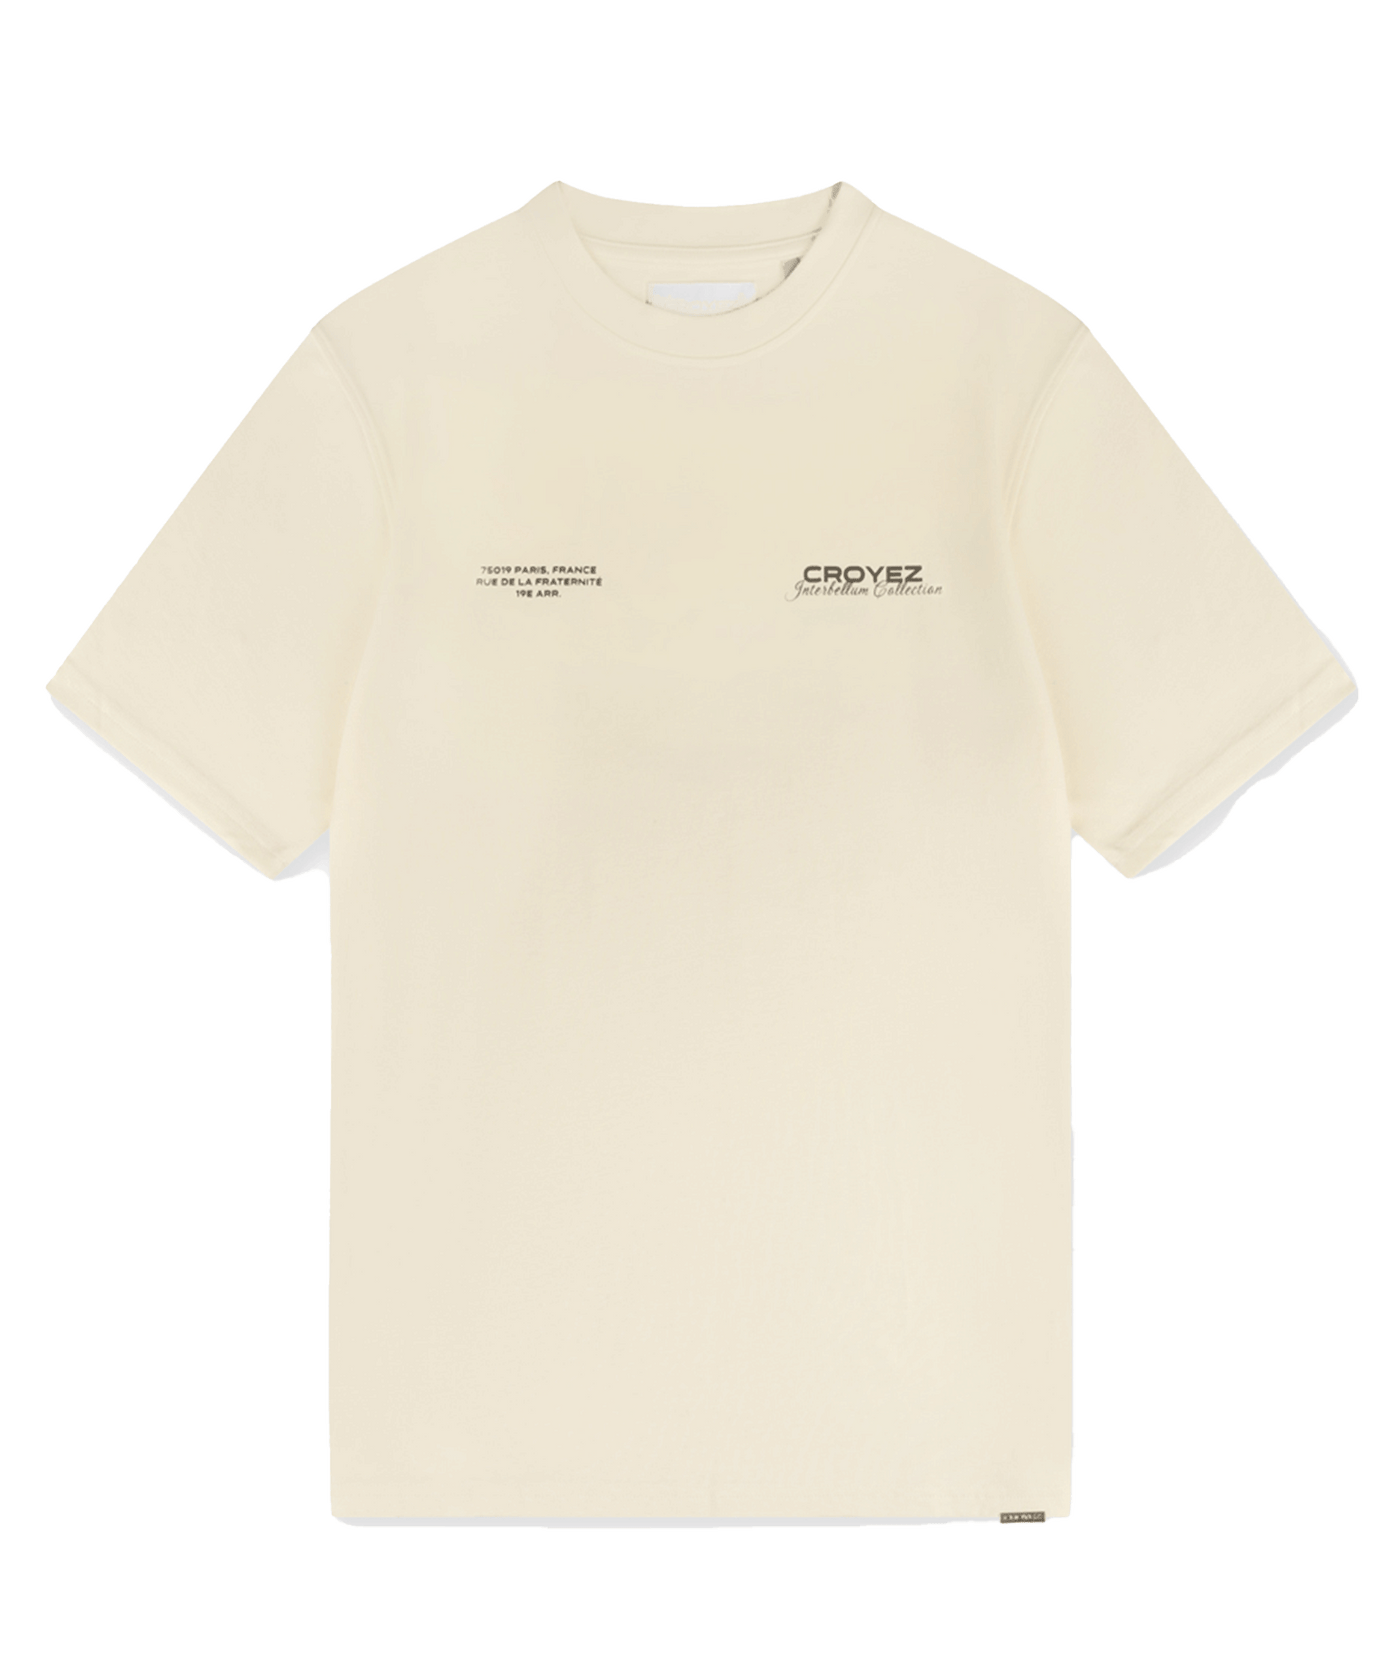 CROYEZ - Collection T-shirt - Vintage White/brown